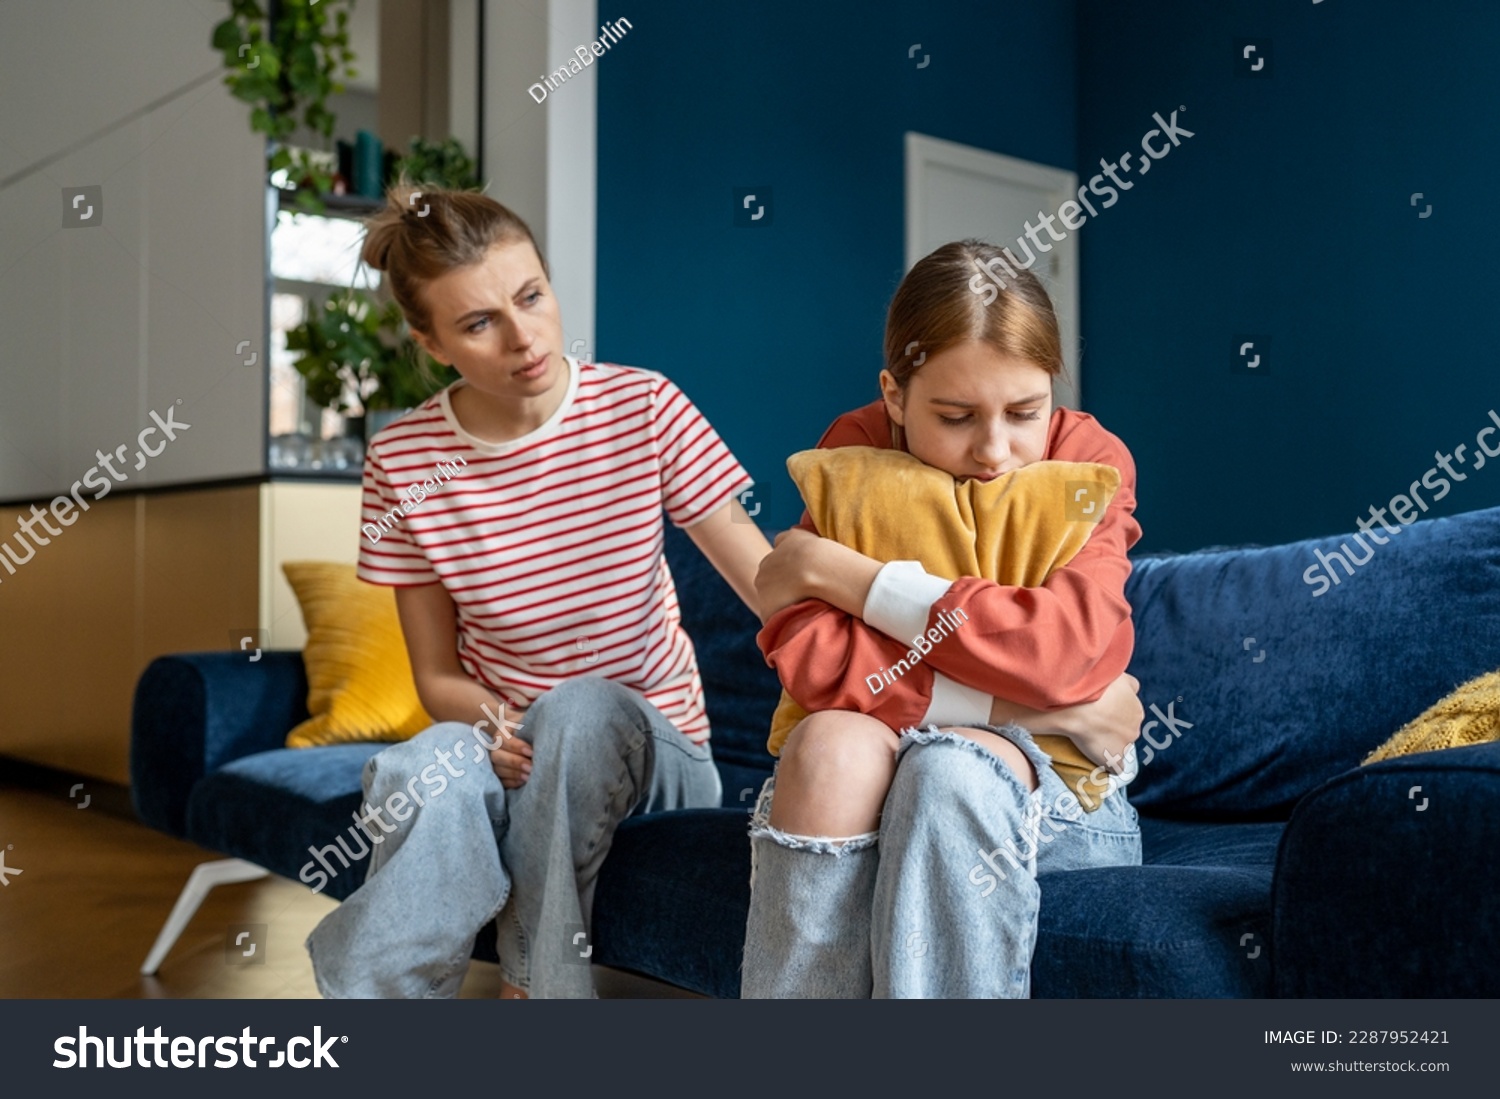 Mother supporting child upset teen girl during difficult adolescence stage, loving parent comforting child at home. Sad teenage daughter crying and feel anxious, being bullied at school #2287952421